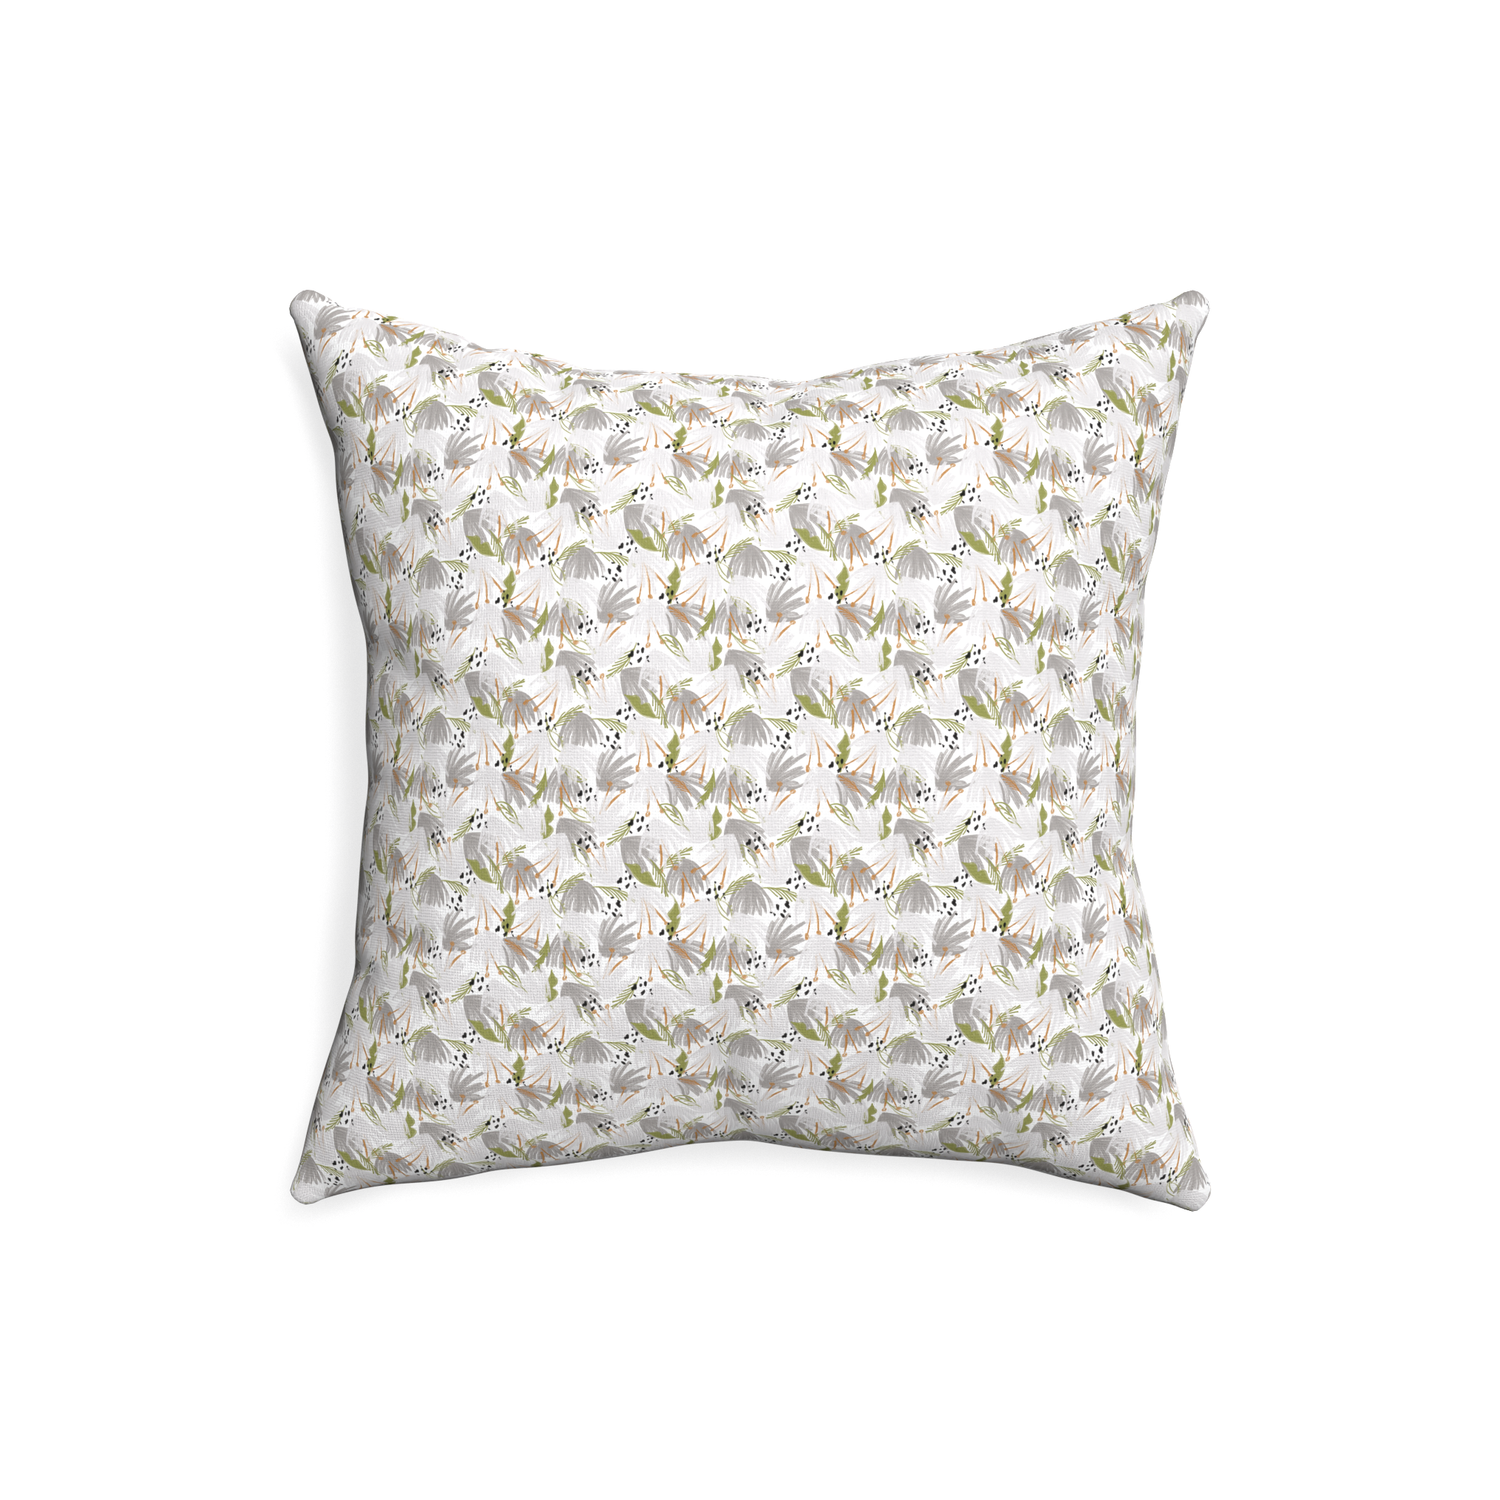 20-square eden grey custom pillow with none on white background